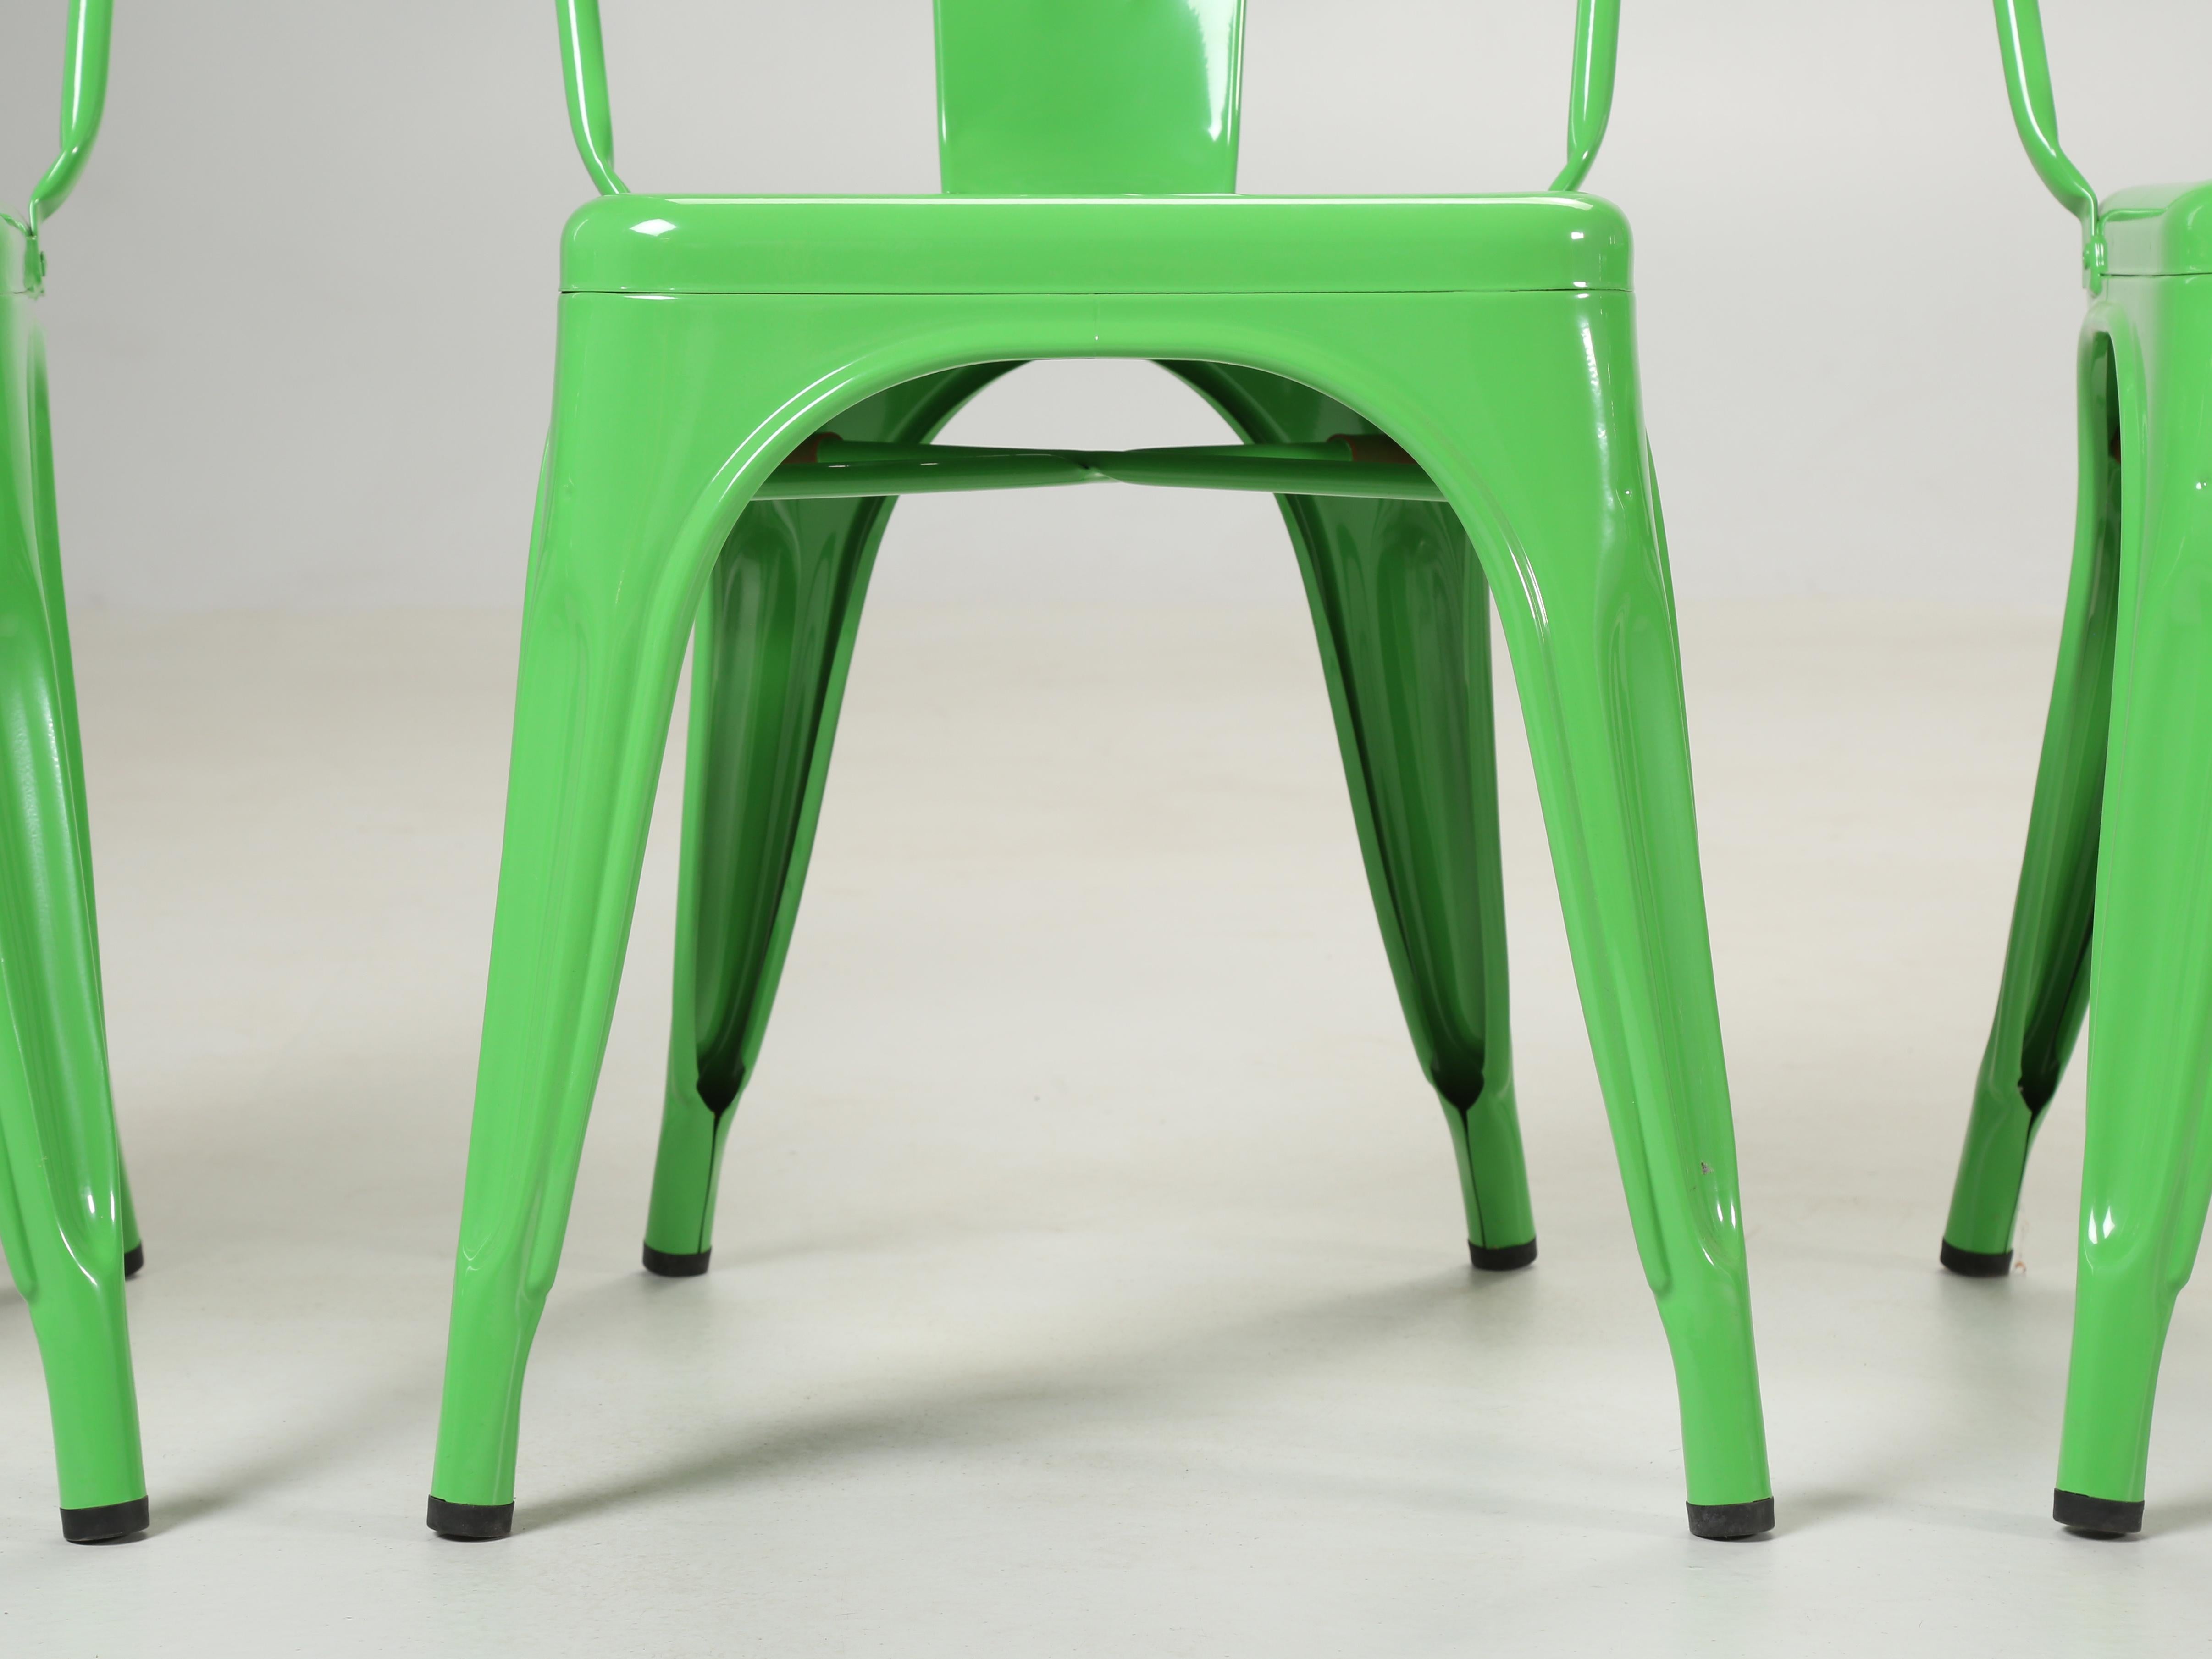 Genuine French Bright Green Tolix Set '6' Steel Chairs, Cosmetic Flaws For Sale 2